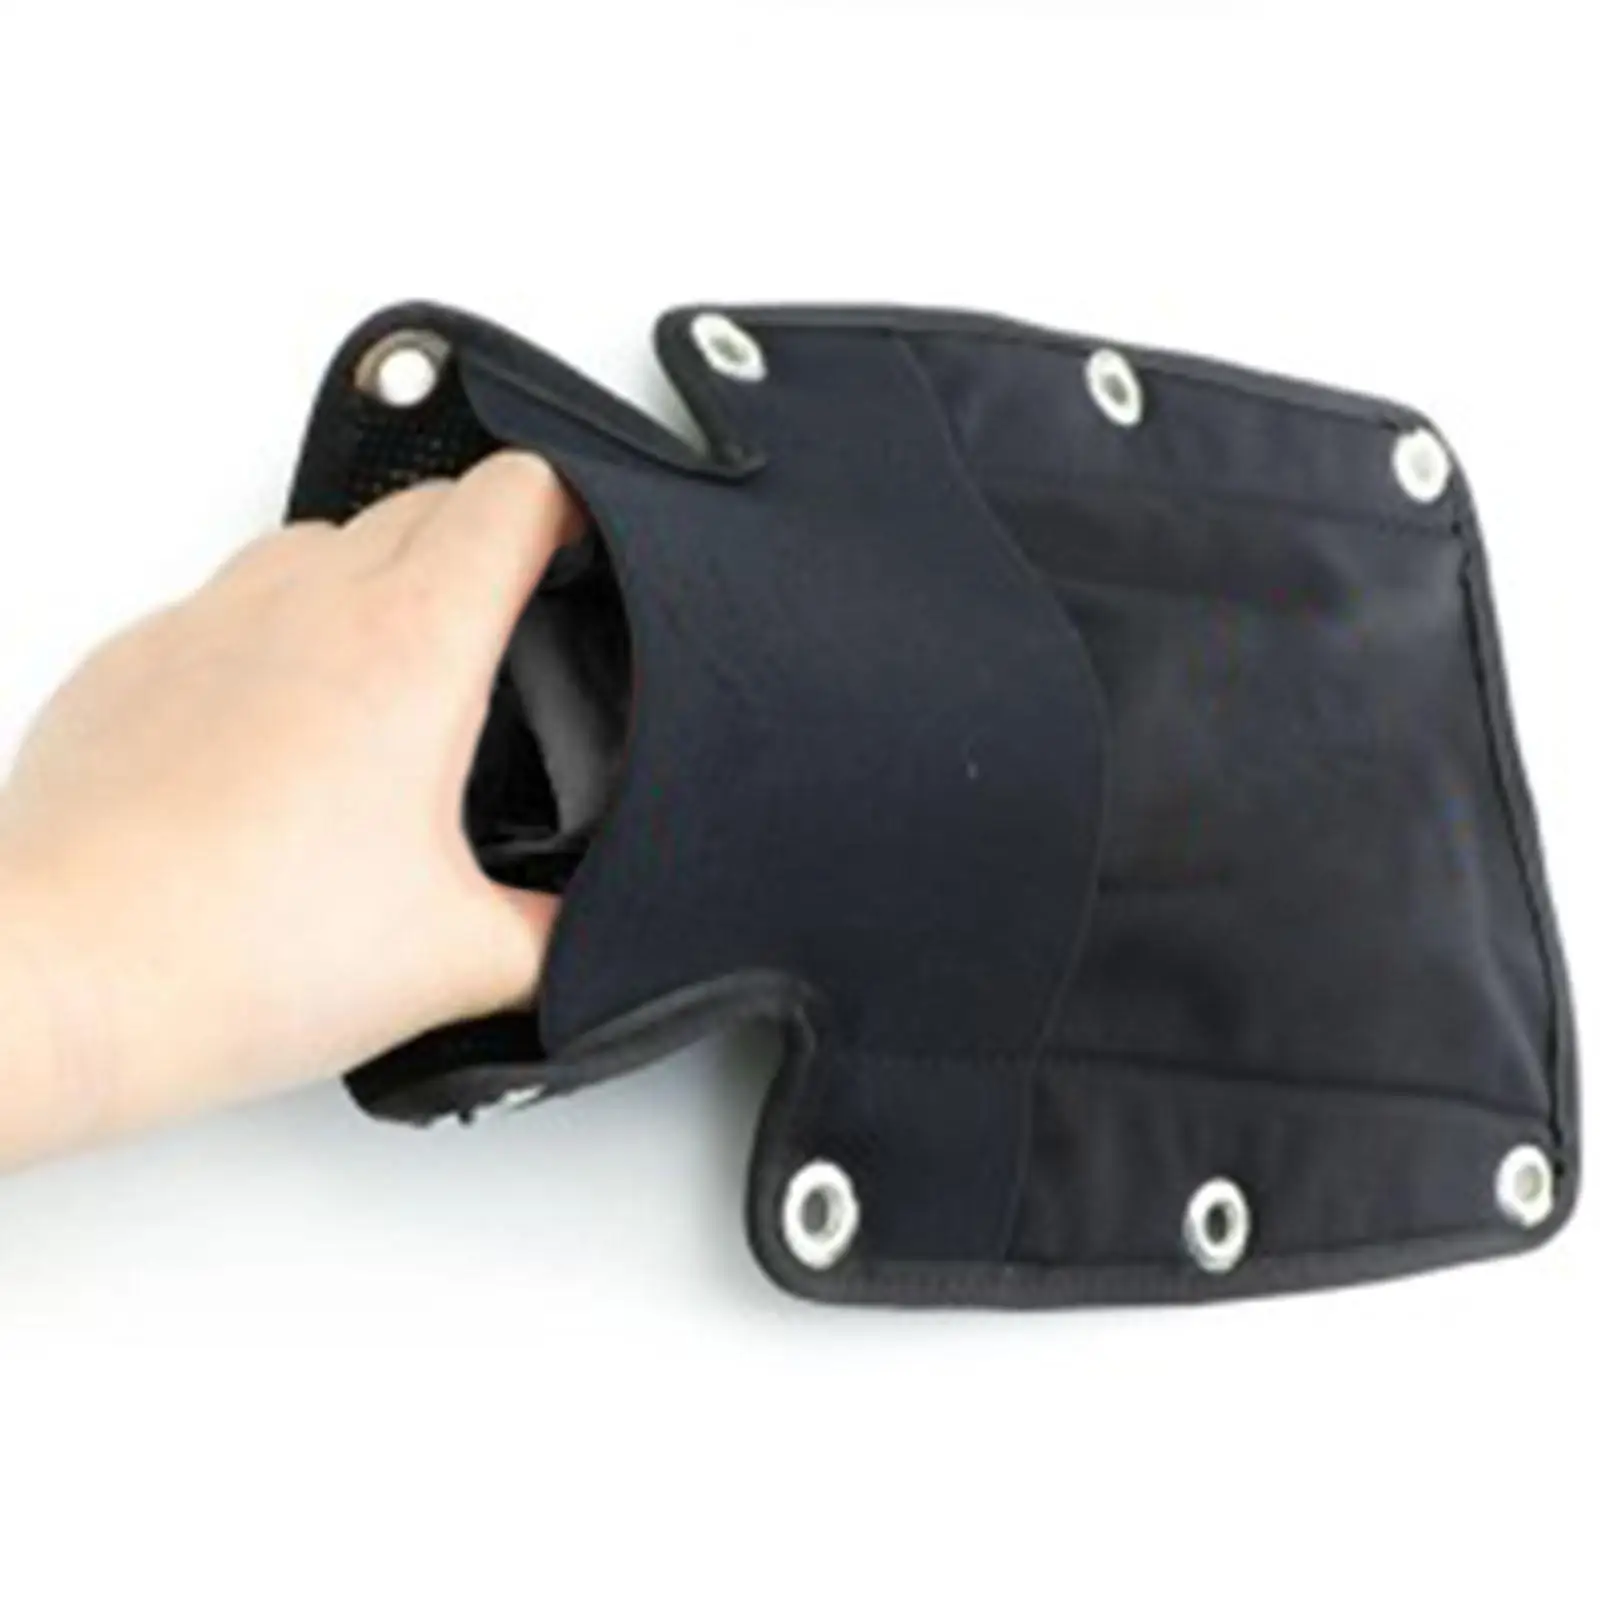 Scuba Diving Backplate Pad with Screws with Storage Pocket Nylon for Harness